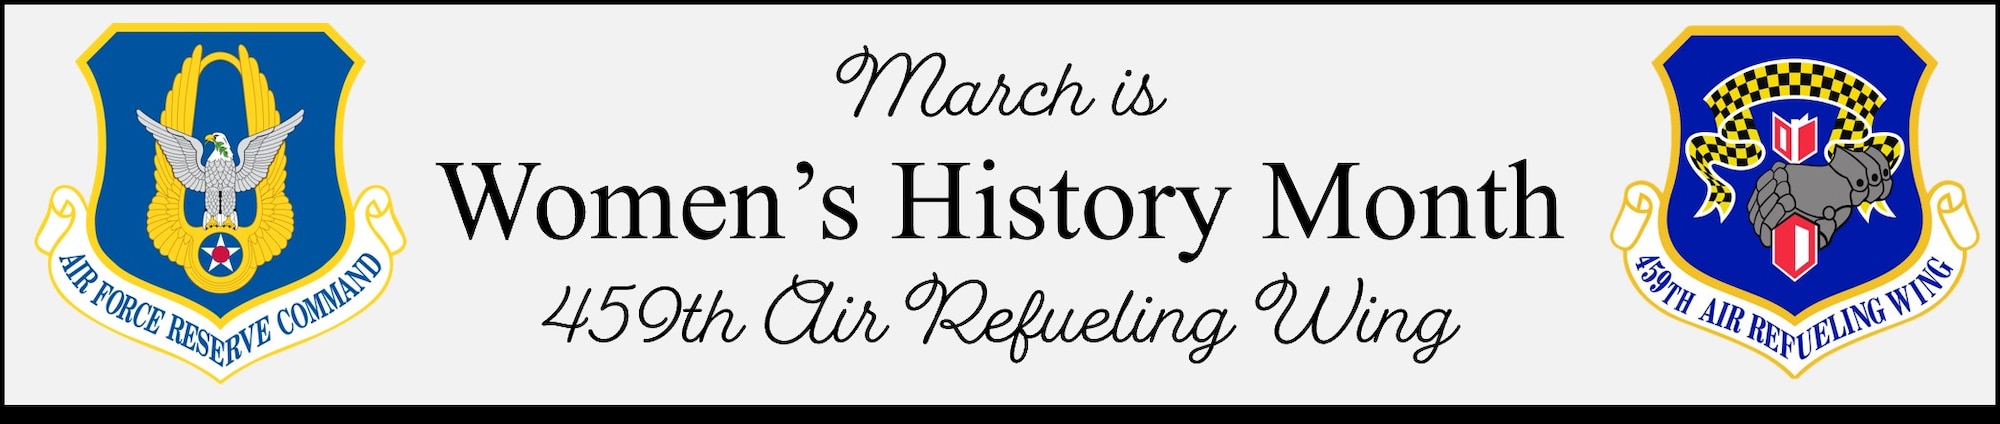 The 459th Air Refueling Wing celebrates Women's History Month.